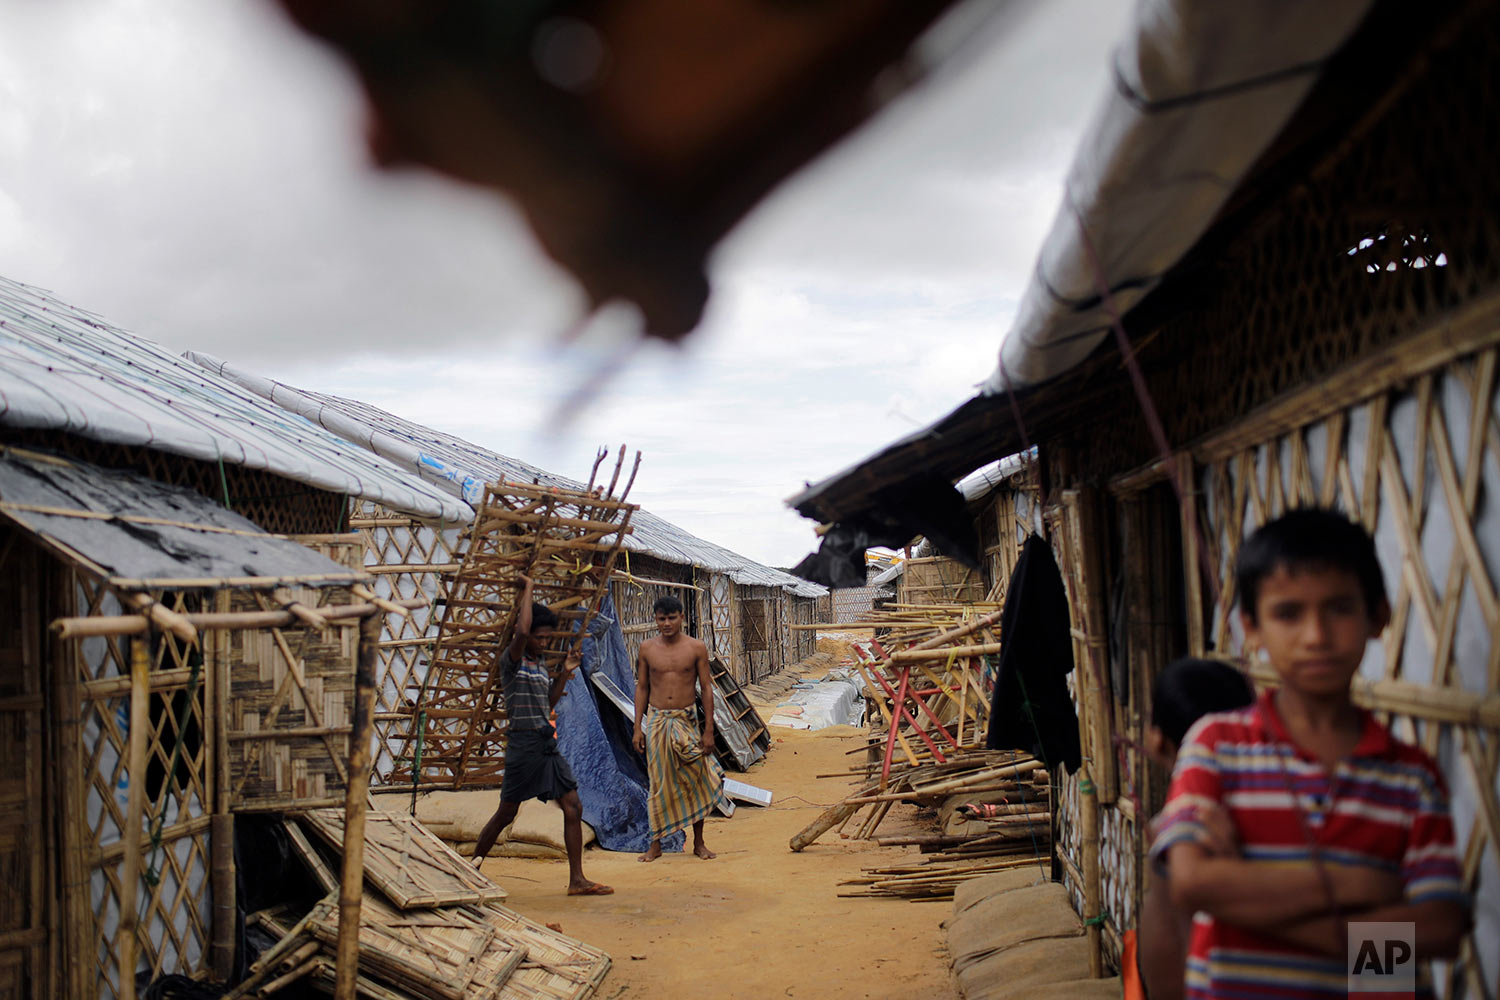  In this Thursday, June 28, 2018, photo, Rohingya refugees carry construction material through huts built in an extended area of Kutupalong refugee camp in Bangladesh where some refugees living in areas considered at risk of landslides and flooding w